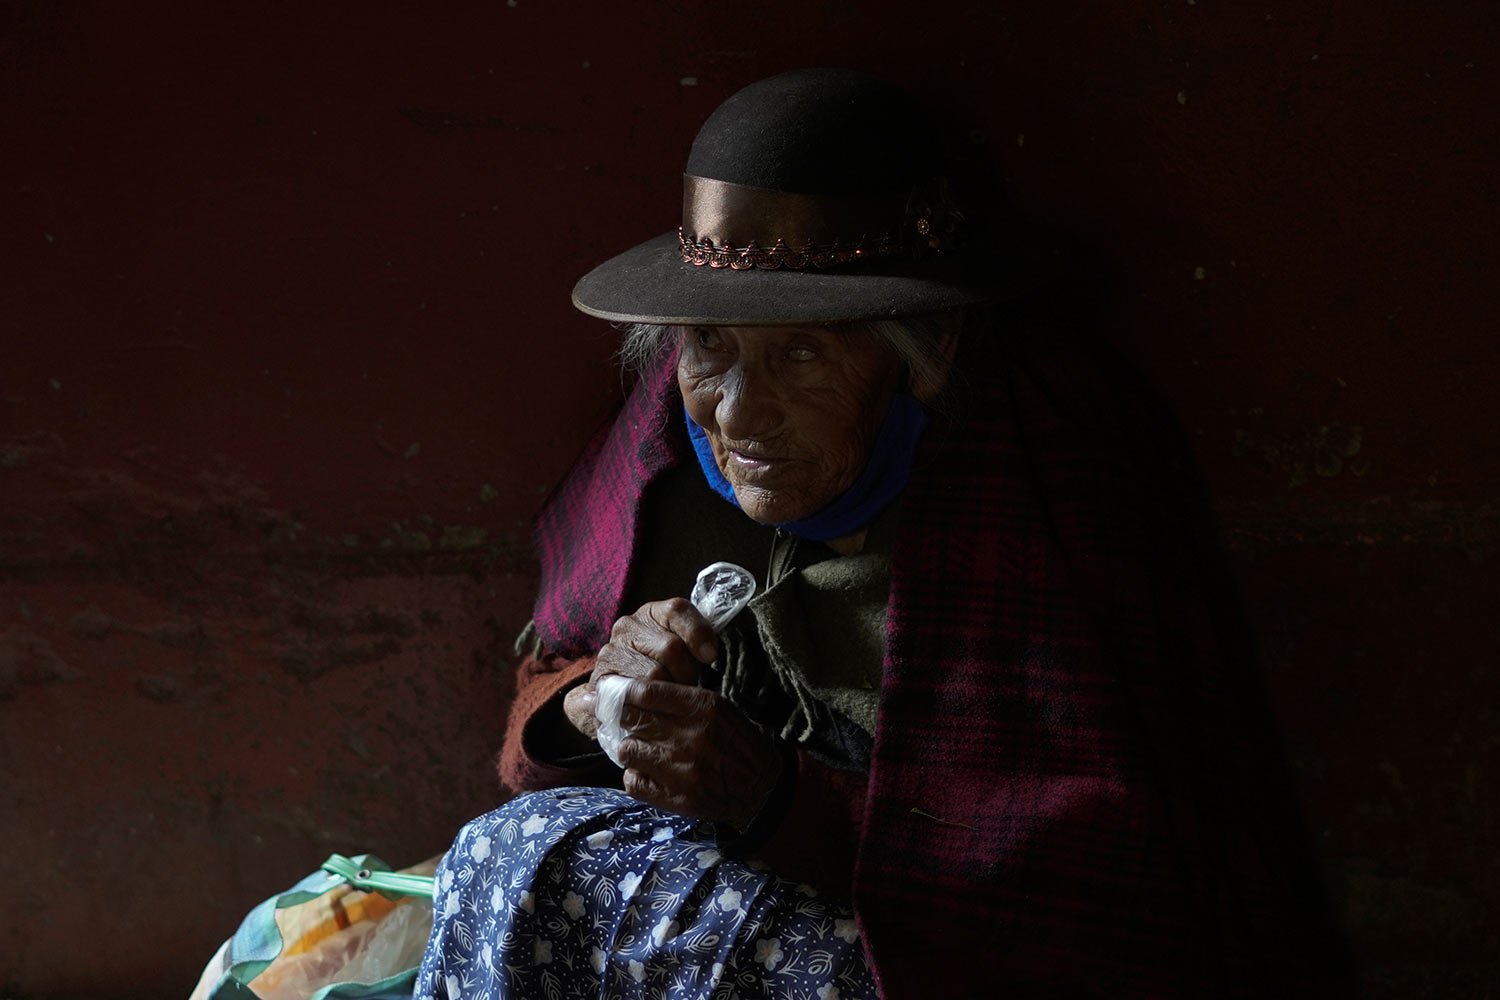  A Quechua Indigenous woman rests at the entrance of the Tupac Amaru market in Juliaca, Peru, March 10, 2023. Peruvians have found ways to manage their daily lives amid the political turmoil sparked by the removal of former President Pedro Castillo w